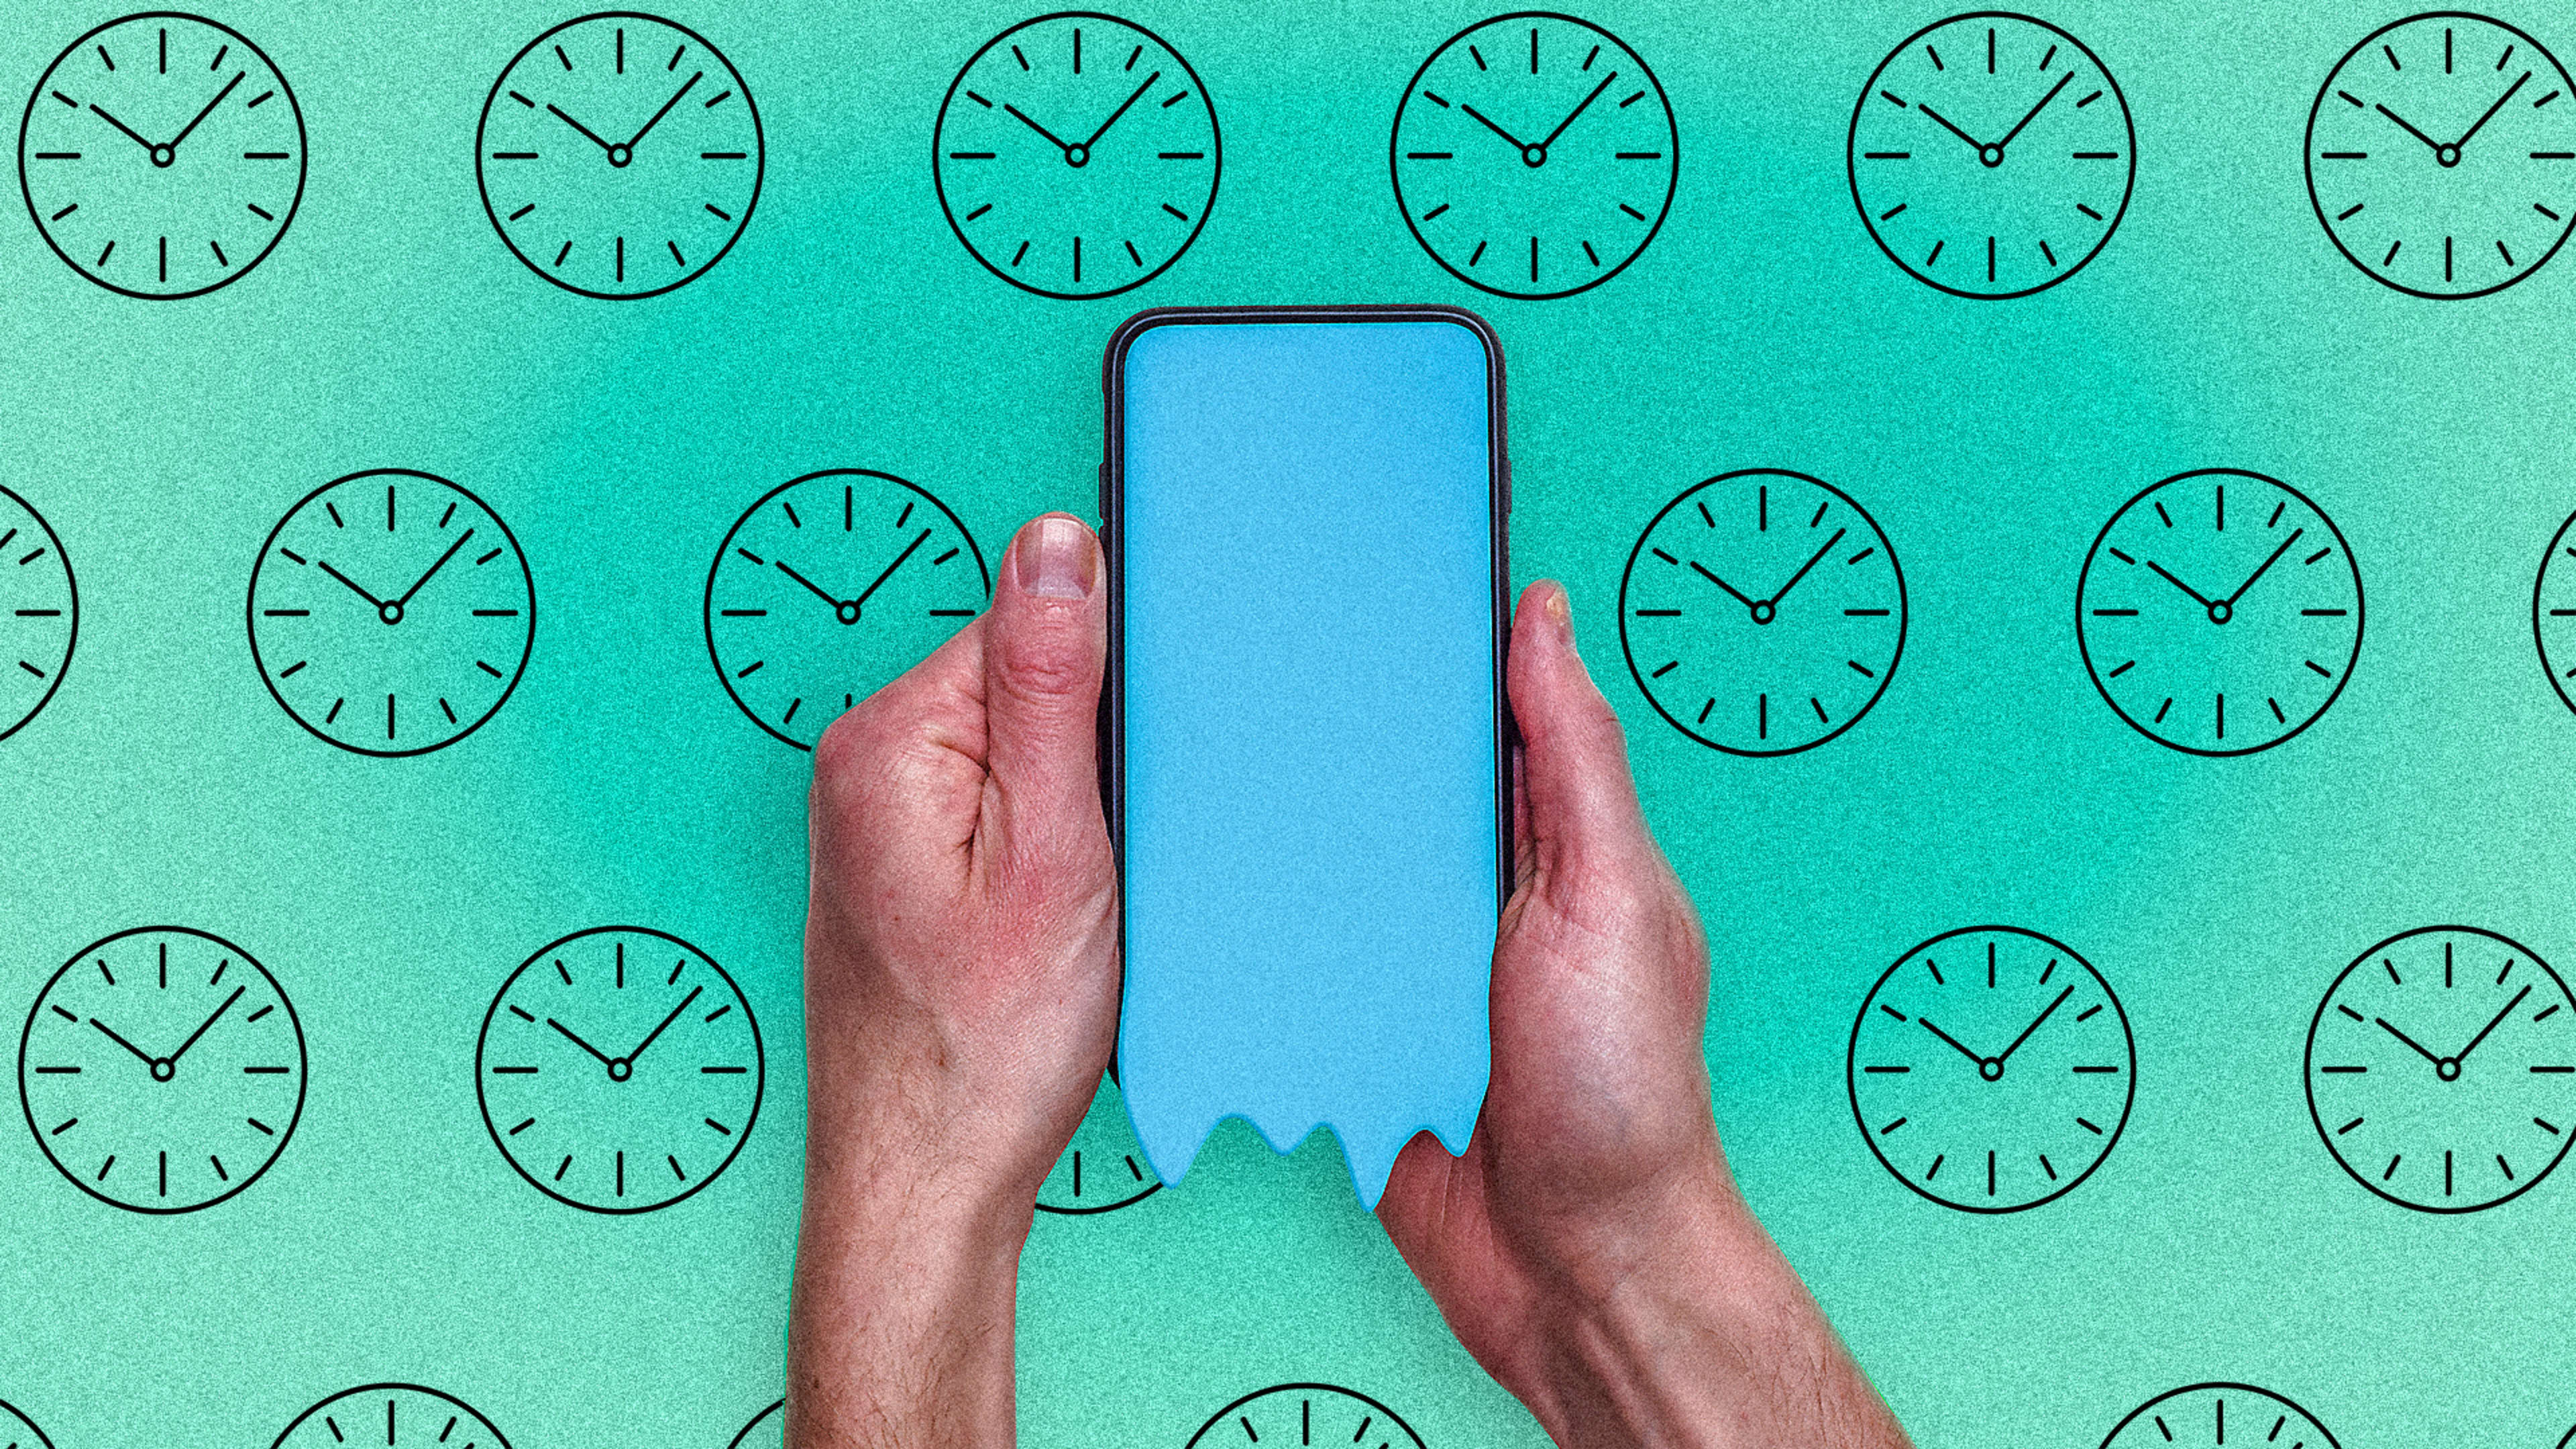 If you’ve got 15 minutes, here are 6 more productive ways to spend time on your phone